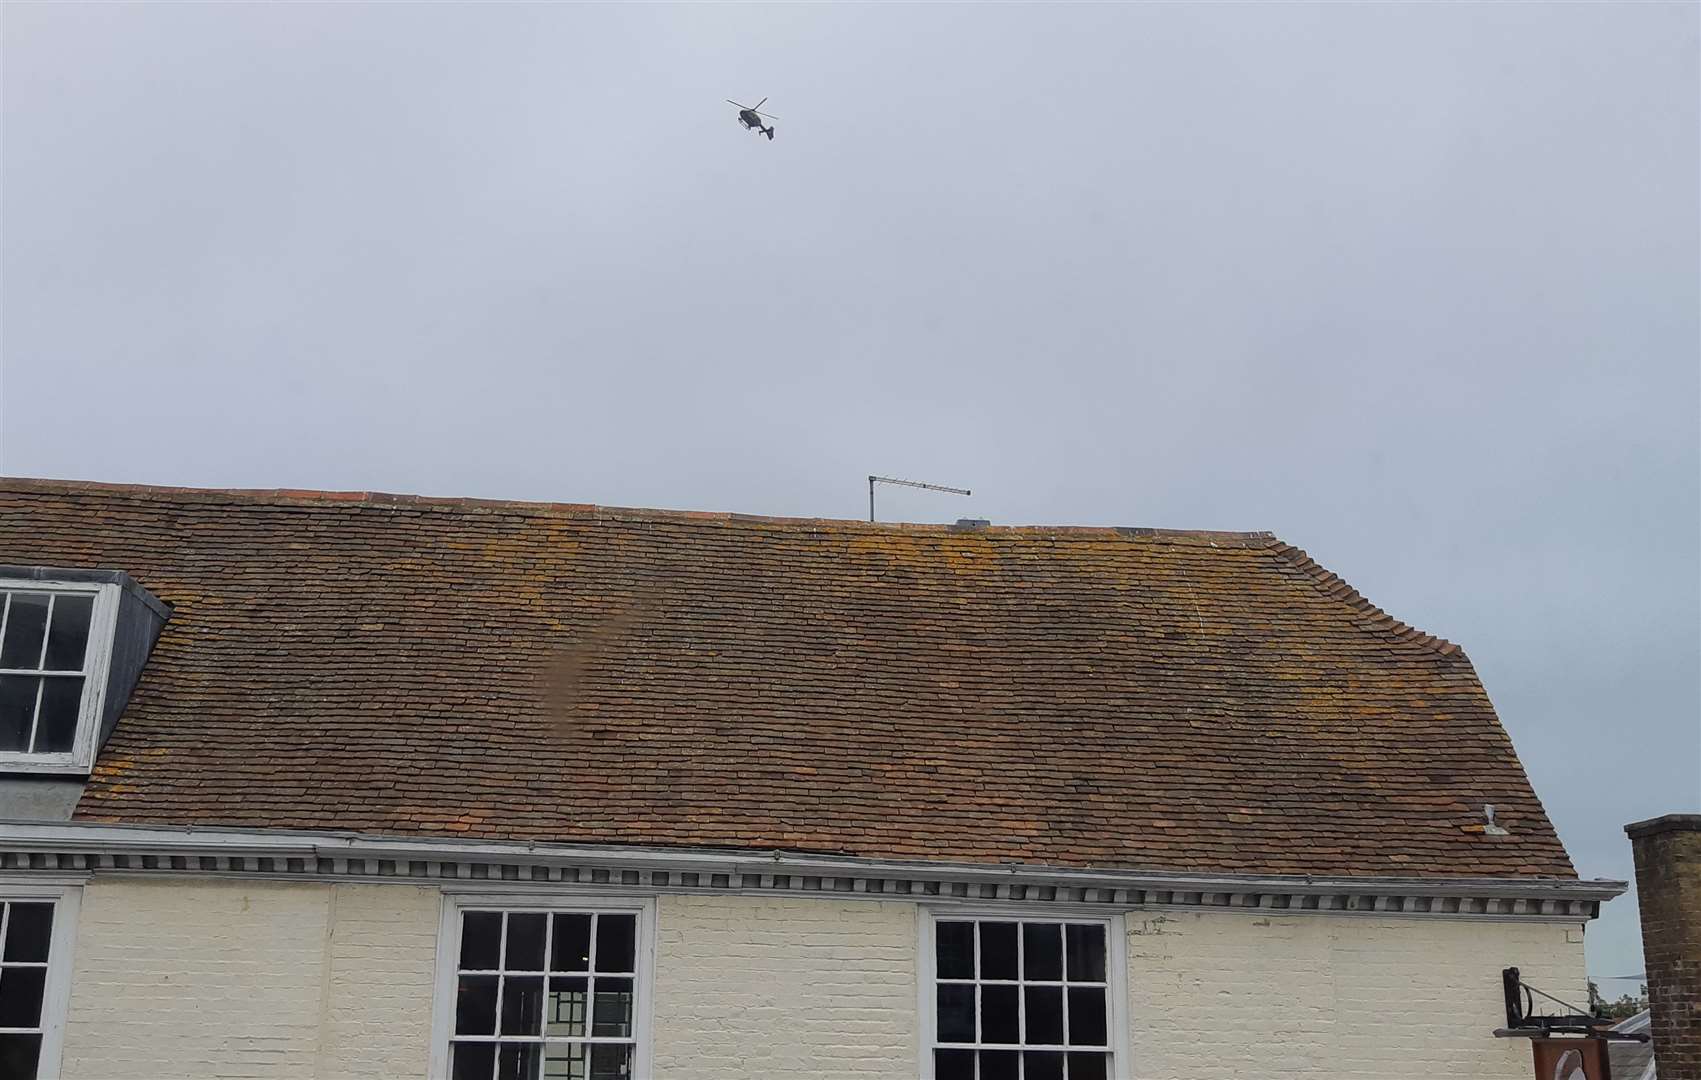 The helicopter hover above Sir Norman Wisdom pub in Deal